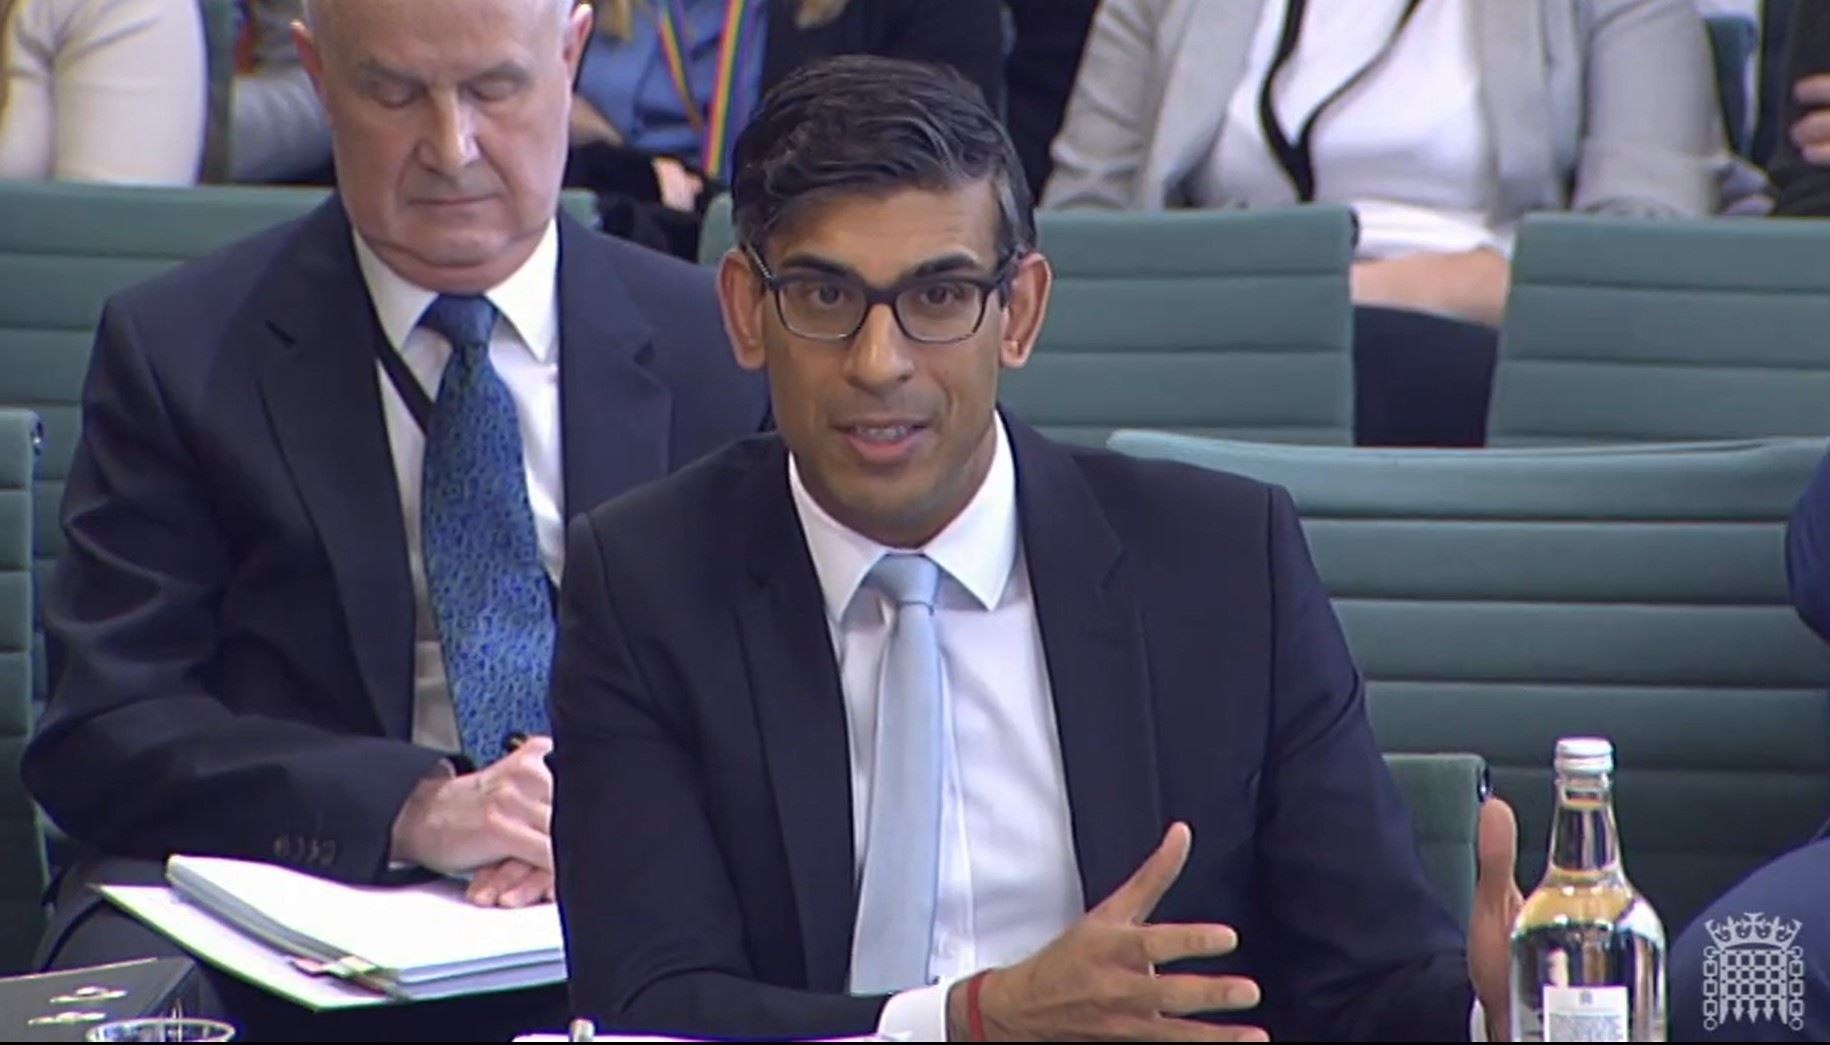 Prime Minister Rishi Sunak answering questions in front of the Liaison Select Committee at the House of Commons (House of Commons/PA)